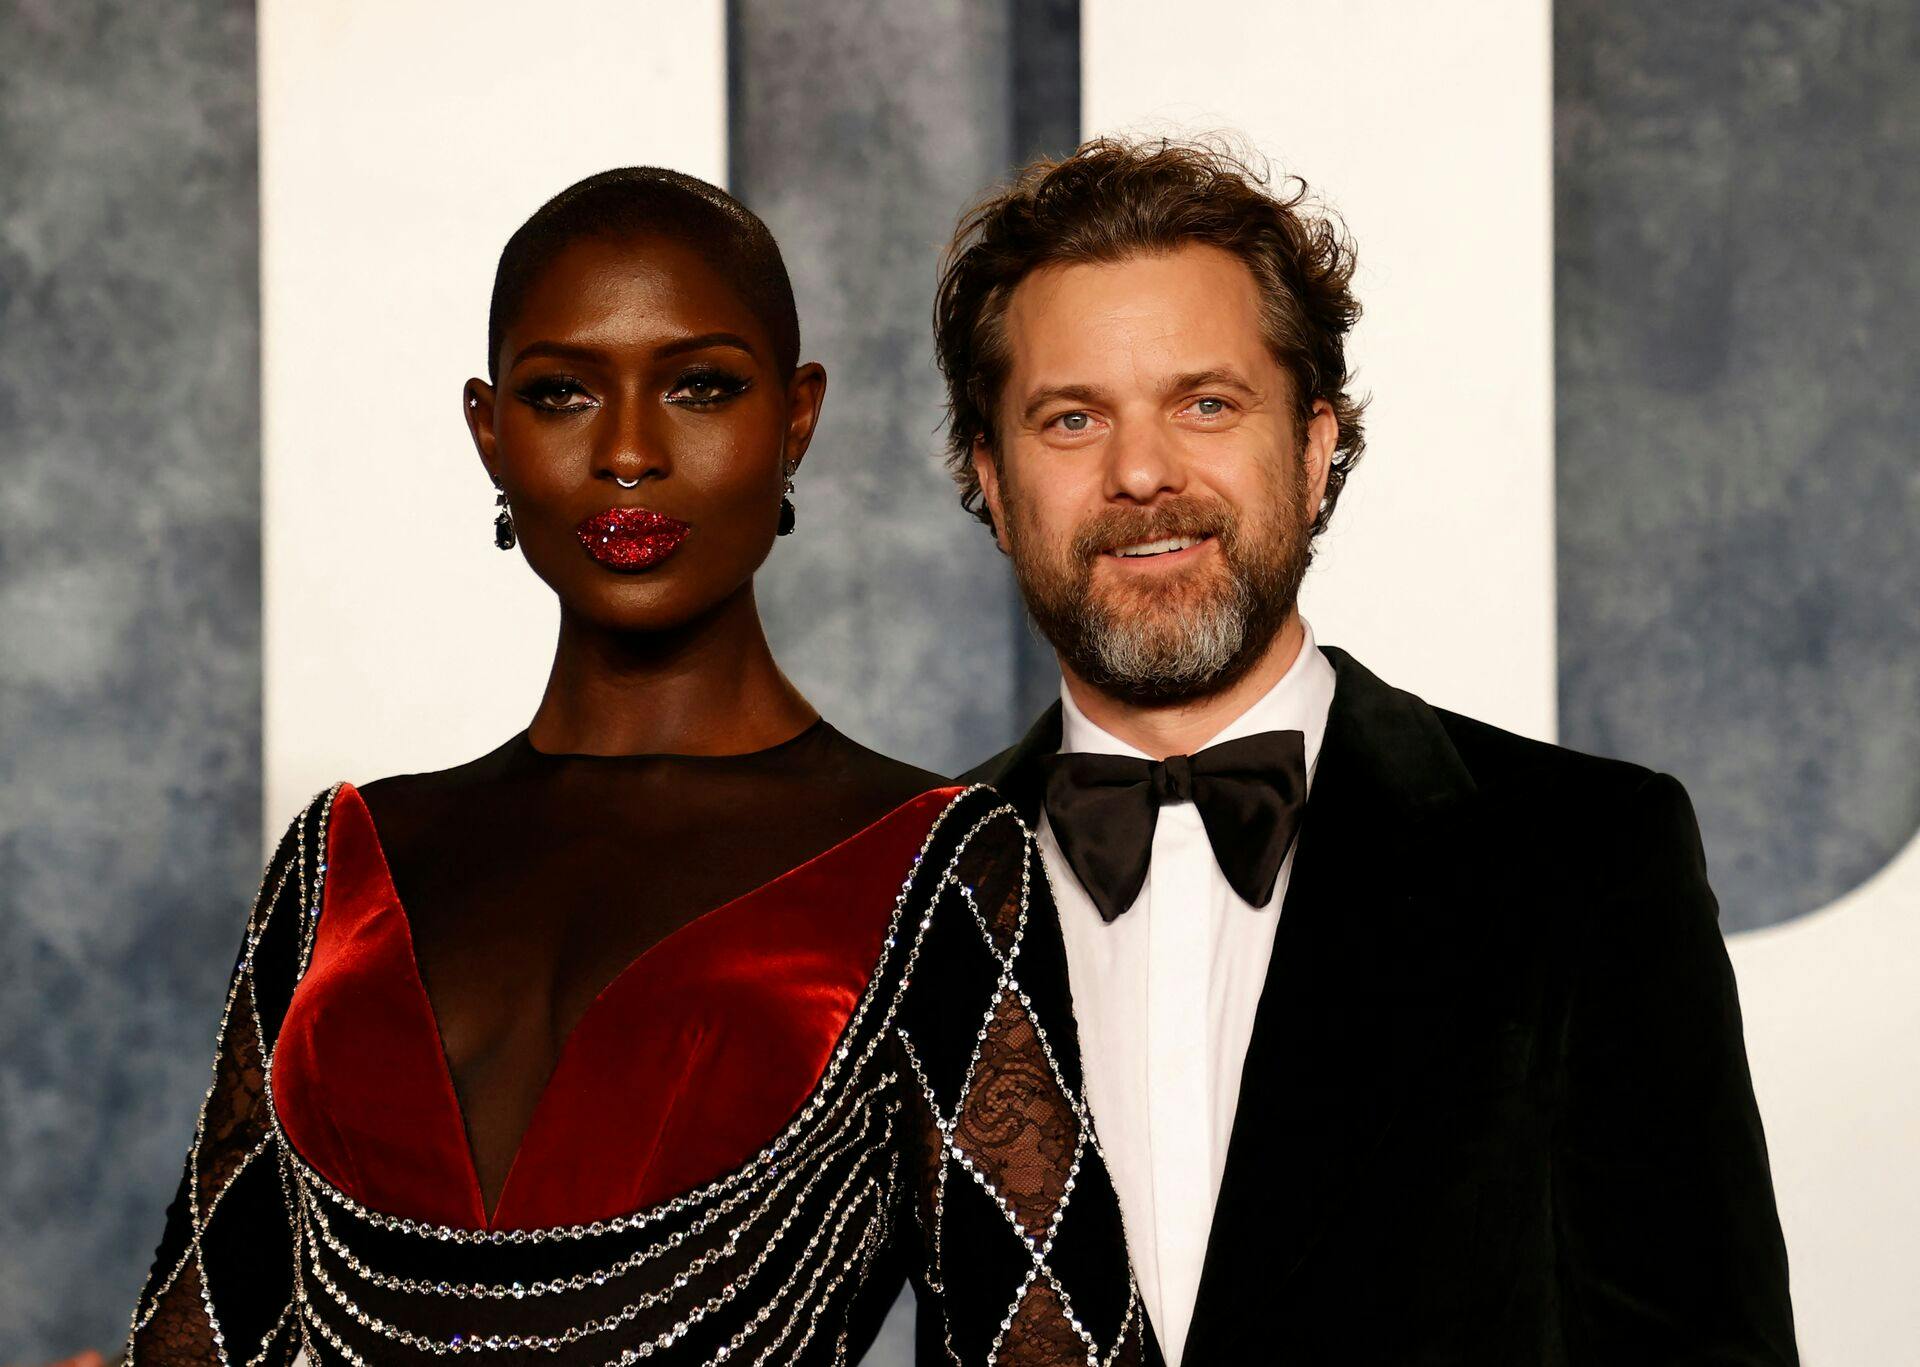 (L-R) British actress Jodie Turner-Smith and her husband, Canadian-US actor Joshua Jackson, attend the Vanity Fair 95th Oscars Party at the The Wallis Annenberg Center for the Performing Arts in Beverly Hills, California on March 12, 2023. (Photo by Michael TRAN / AFP)